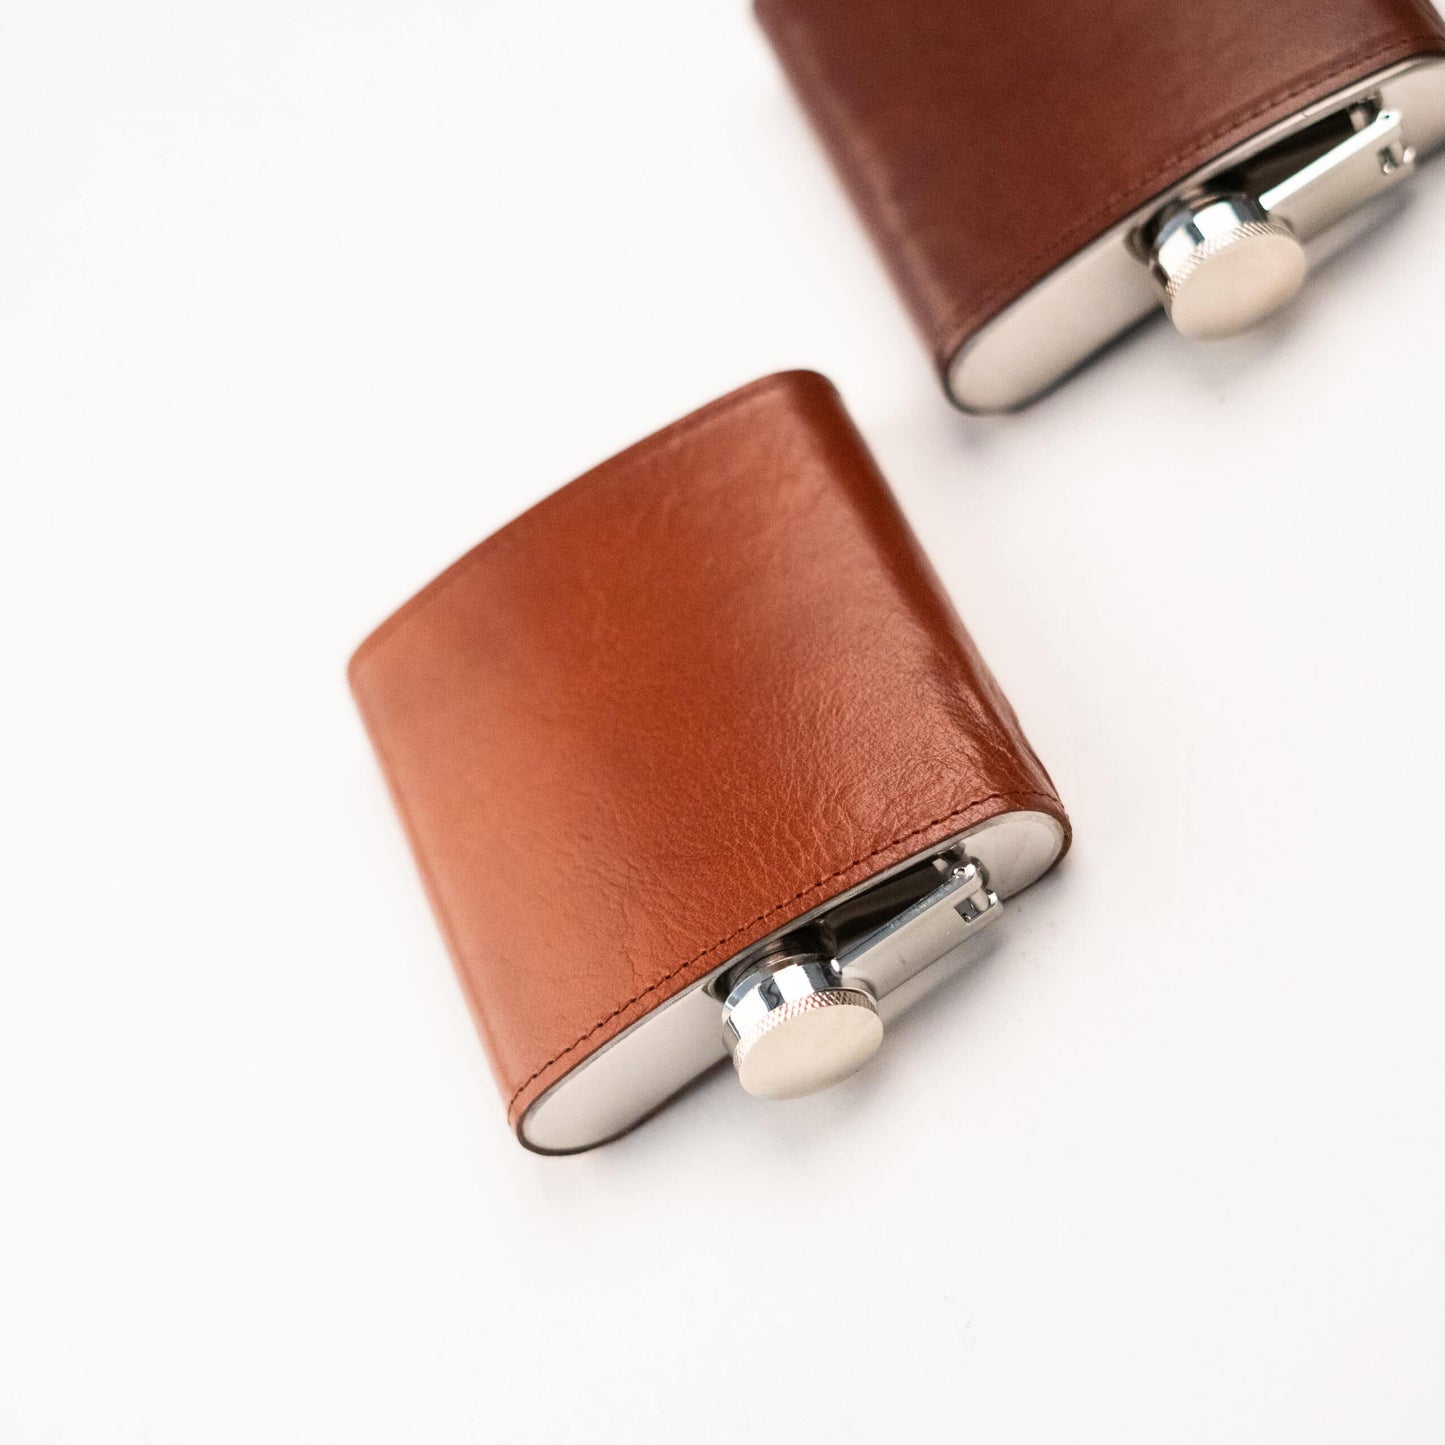 A pair of brown leather flasks, crafted from stainless steel and enveloped in luxurious natural leather. Perfect for sipping spirits or sharing a drink with friends. Elevate your drinking experience with the Hip Leather-Covered Flask from Men In Style.